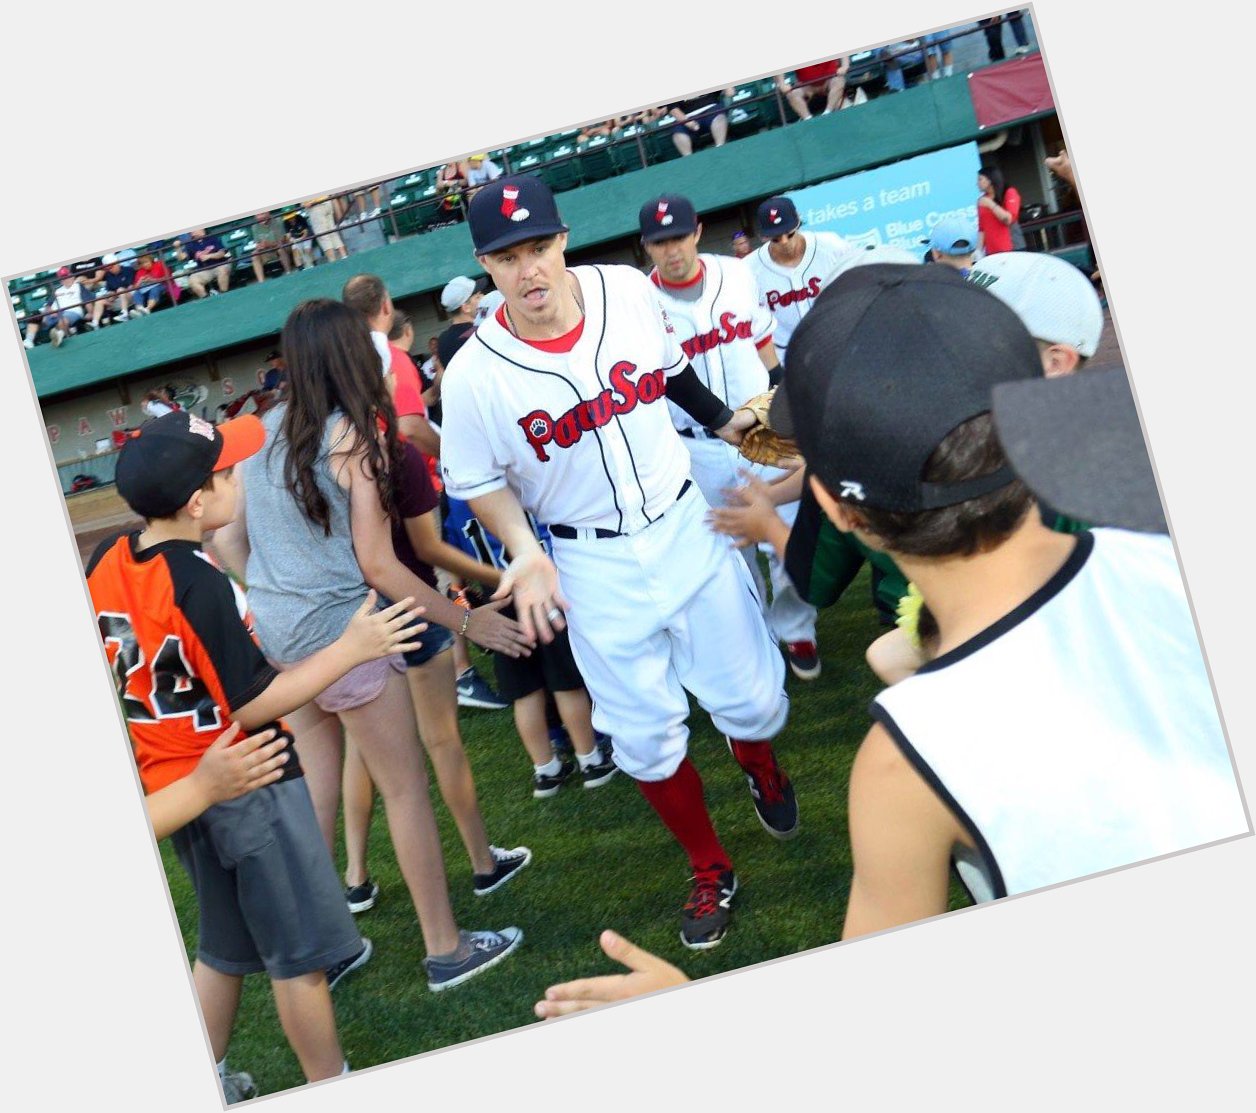 Help us give the Brock Star some high fives on his birthday... Happy bday to Brock Holt!   